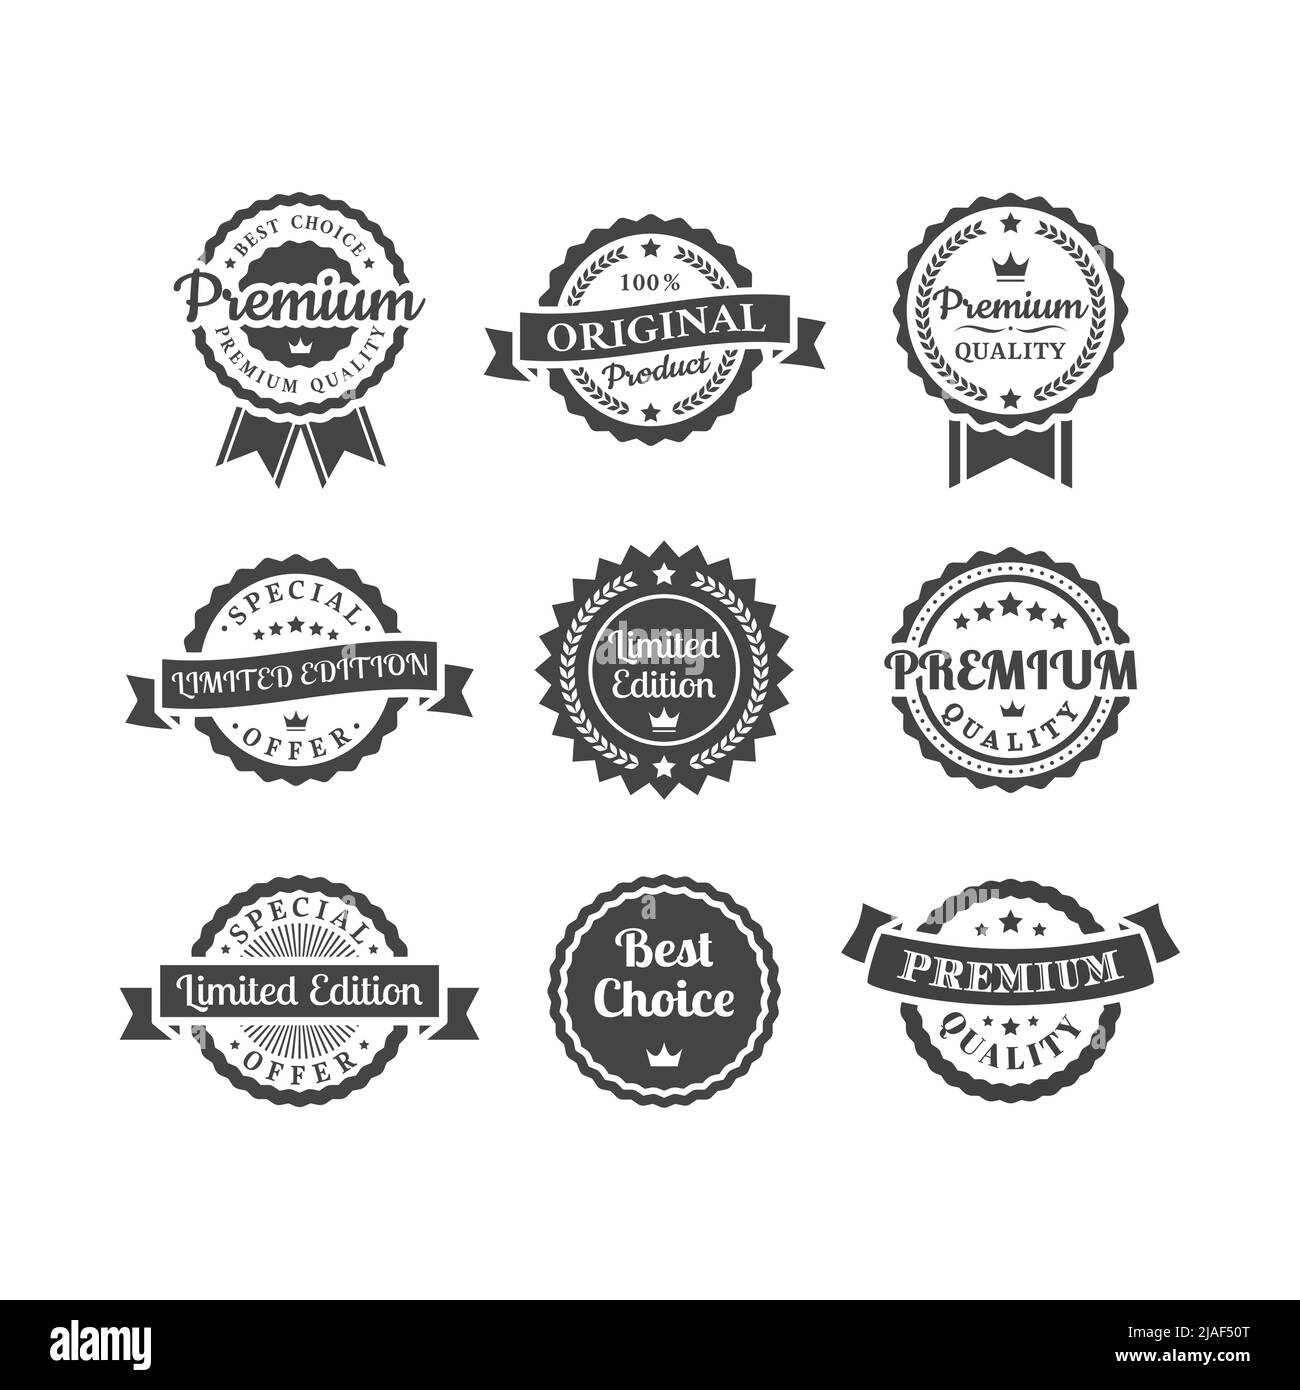 Premium quality and limited edition label badge set. Original product, best choice vector ribbon banner badges. Stock Vector